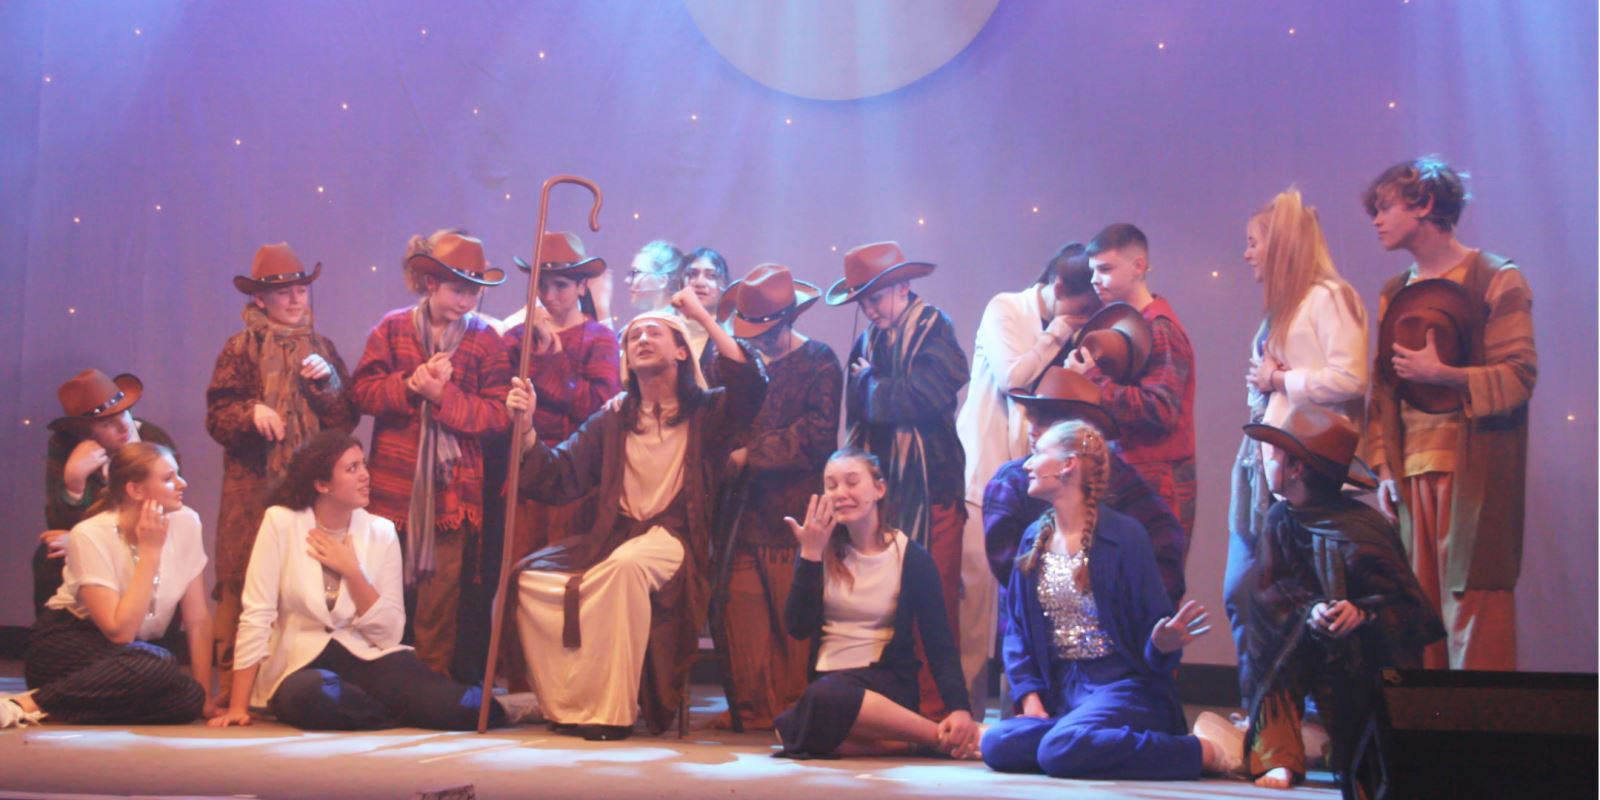 The brothers and Jacob on stage in Joseph